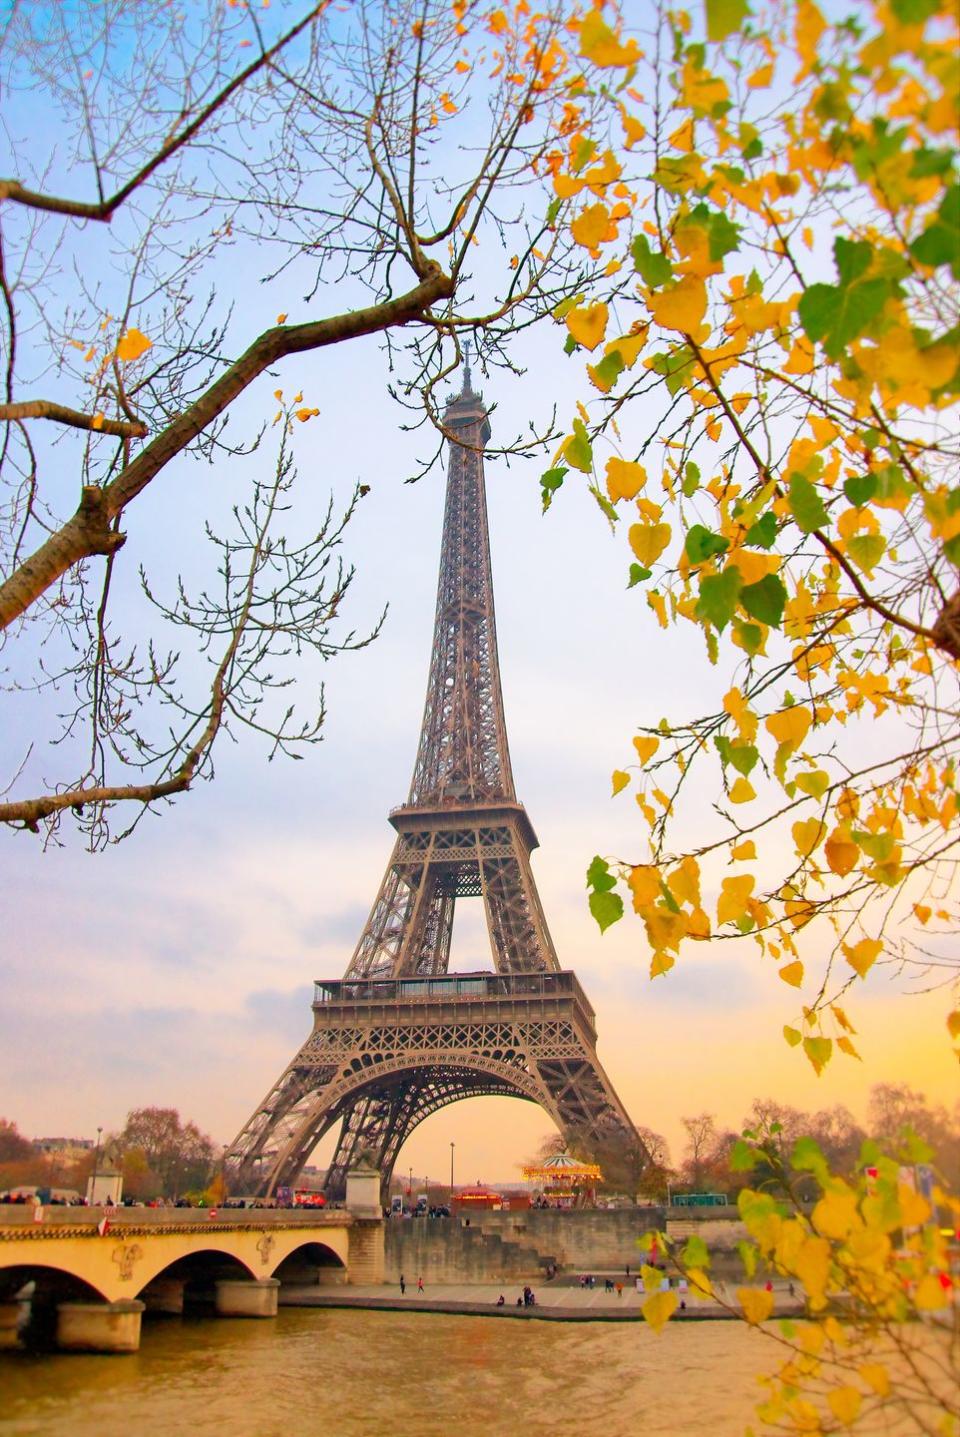 <p>We didn't think it was possible for the City of Love to get anymore romantic, but <em>mais oui</em>, it absolutely is when you see the Eiffel Tower, Notre Dame, and the Seine framed in rich fall hues.</p><p><a class="link " href="https://go.redirectingat.com?id=74968X1596630&url=https%3A%2F%2Fwww.tripadvisor.com%2FHotel_Review-g187147-d207722-Reviews-Hotel_de_Crillon_A_Rosewood_Hotel-Paris_Ile_de_France.html&sref=https%3A%2F%2Fwww.womenshealthmag.com%2Flife%2Fg41359461%2Fbest-fall-foliage-places%2F" rel="nofollow noopener" target="_blank" data-ylk="slk:BOOK NOW">BOOK NOW</a> <em><strong>Hotel de Crillon</strong></em></p>